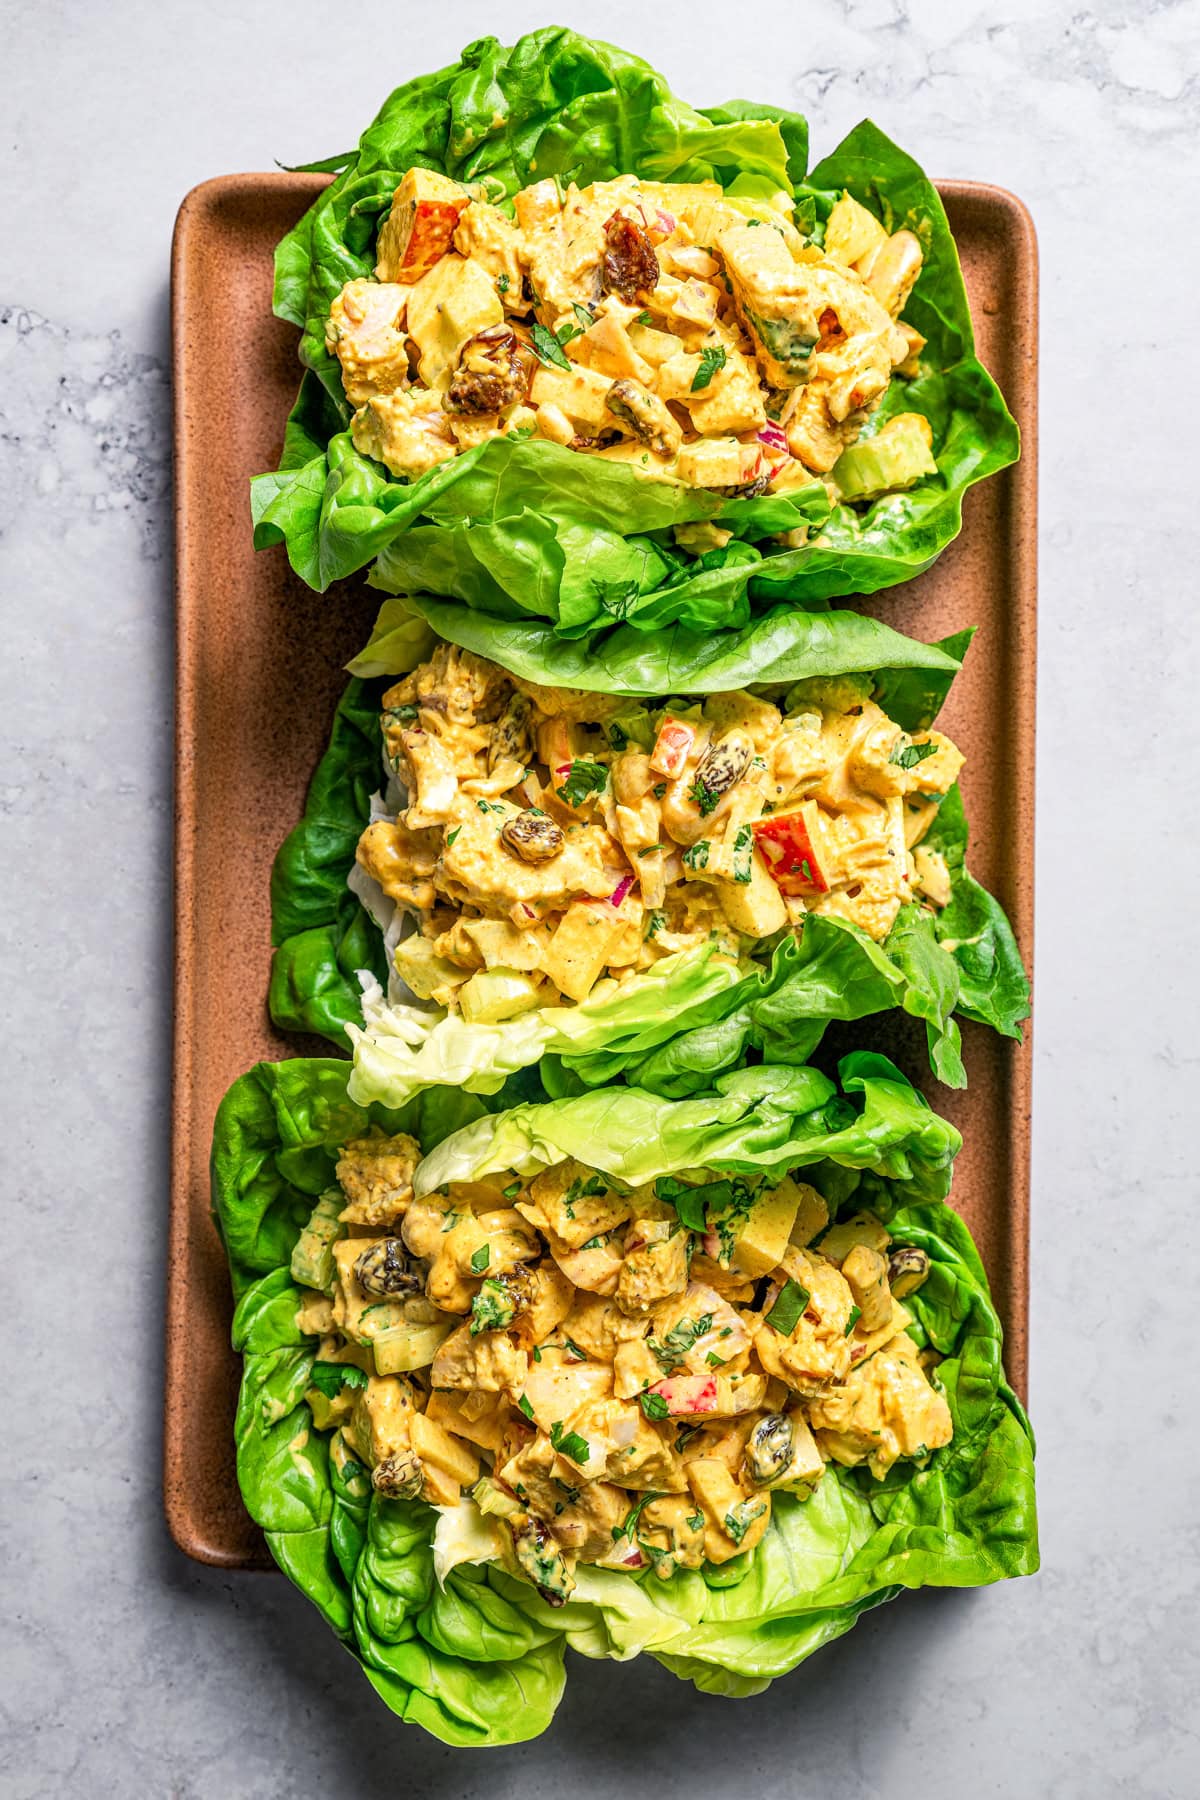 Three lettuce wraps with chicken salad arranged on a wooden board.